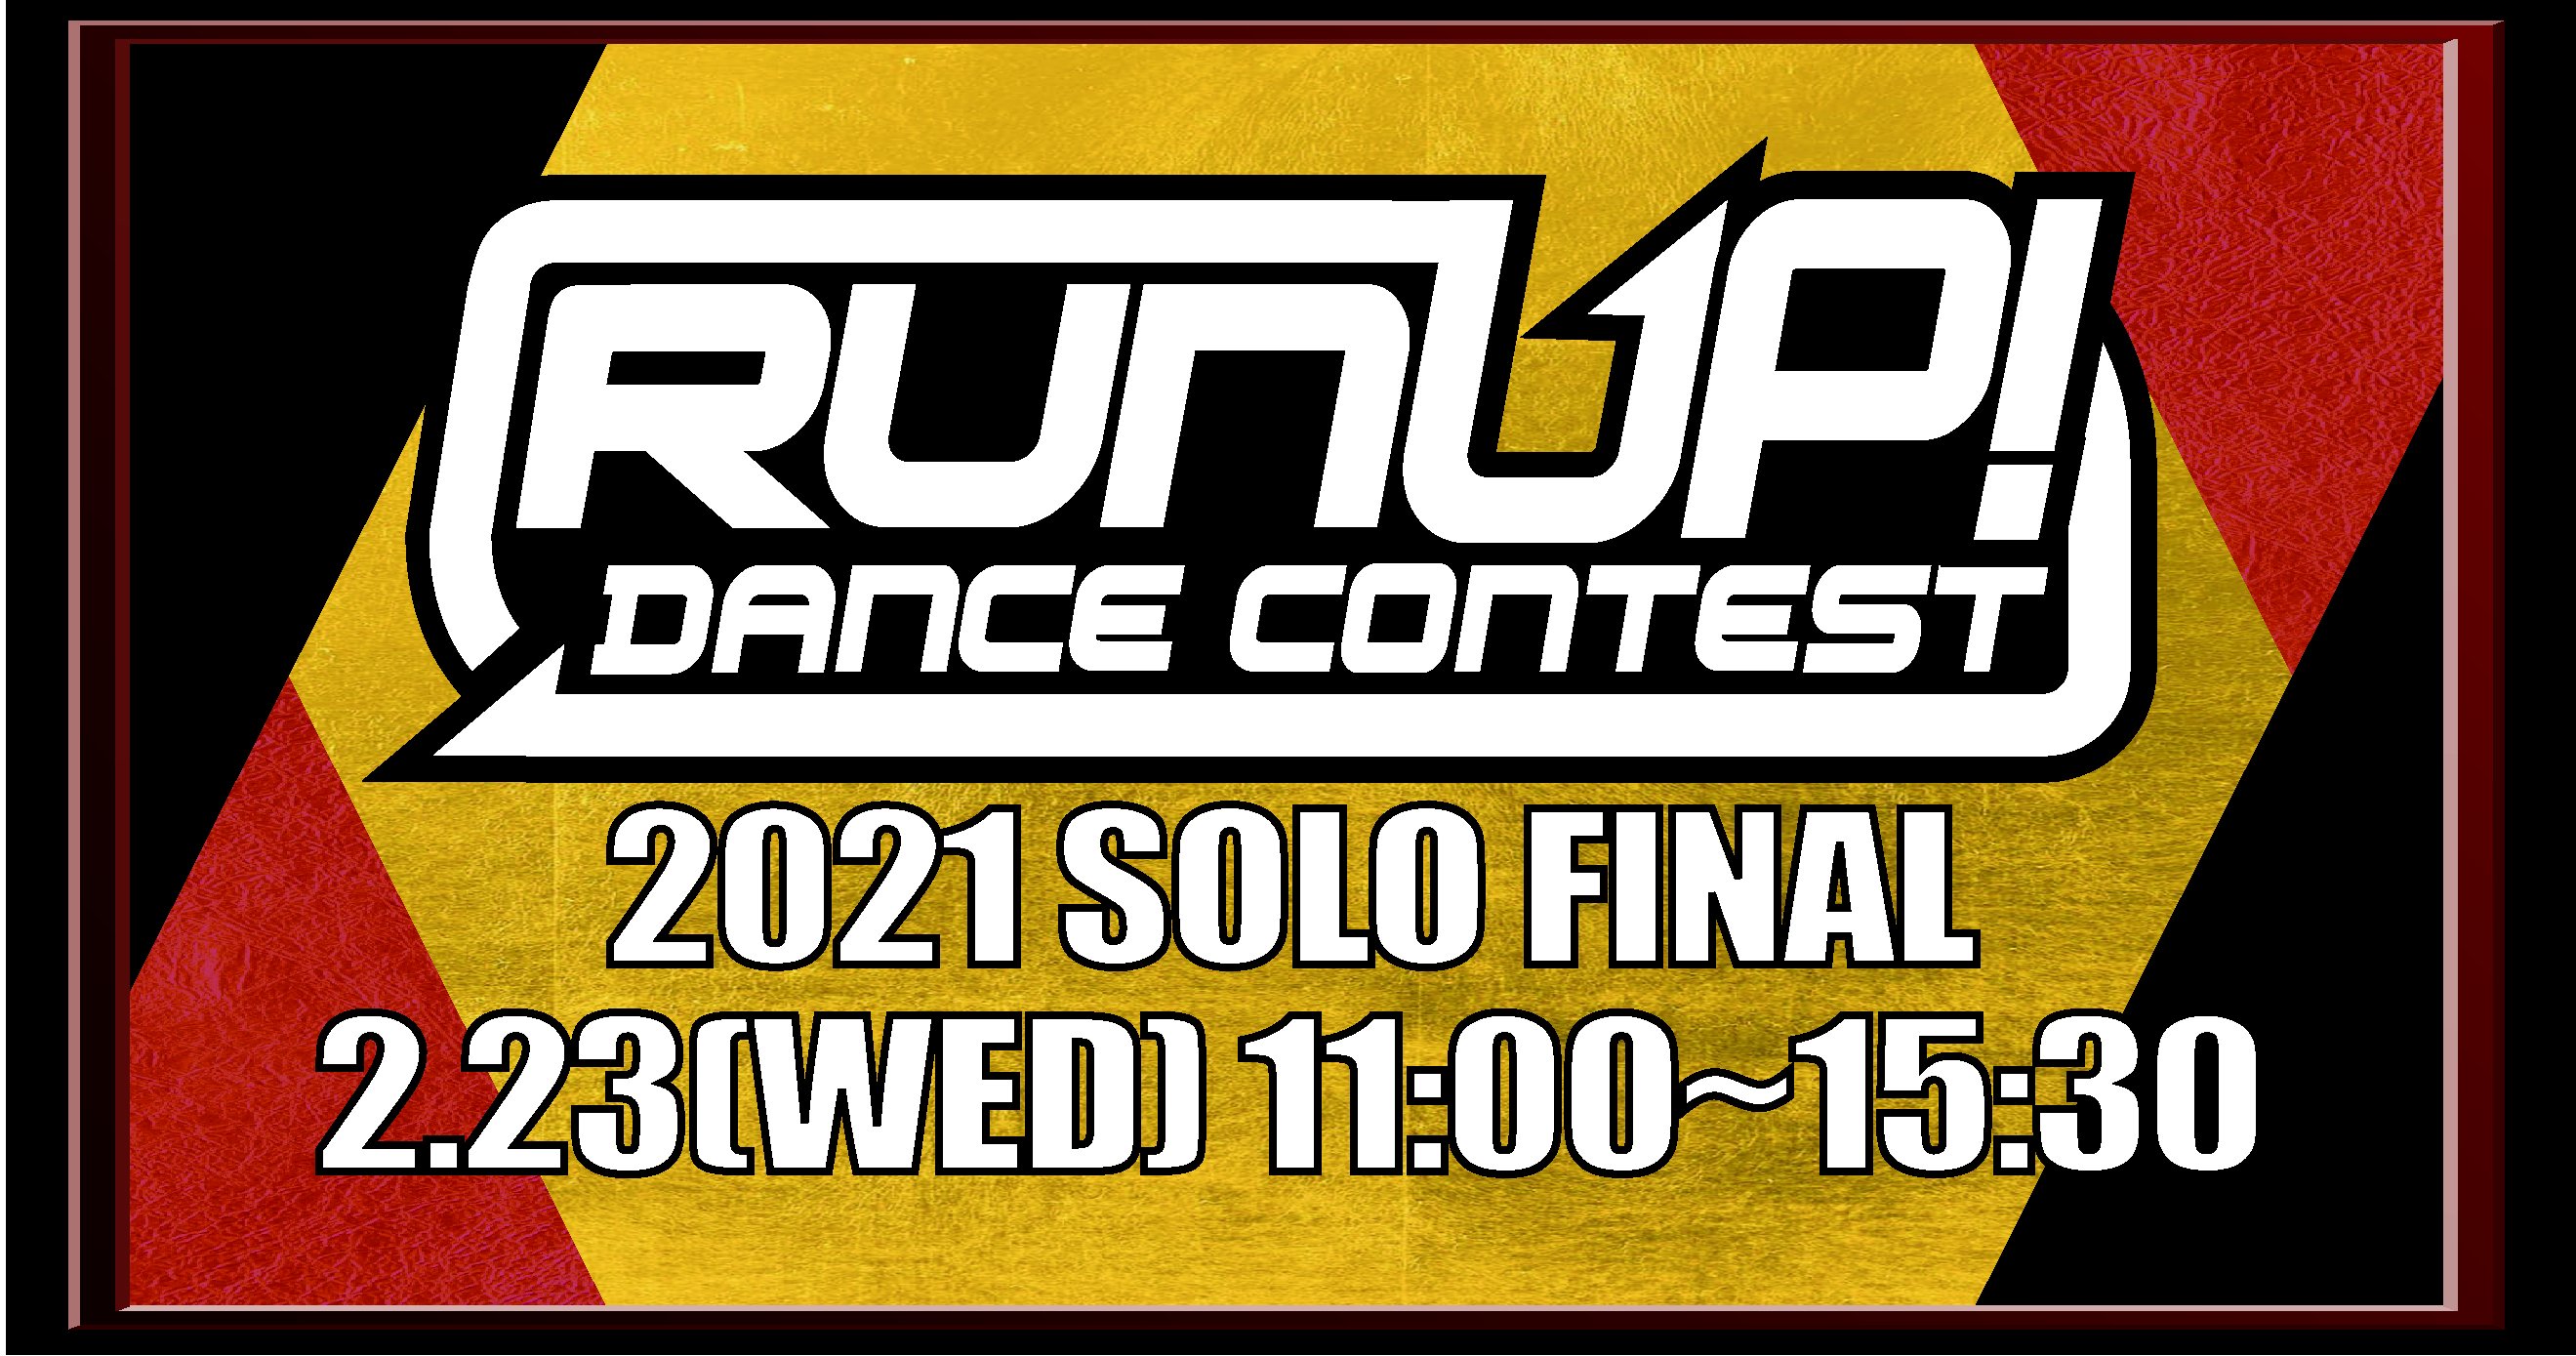 2021 SOLO FINAL サムネイル